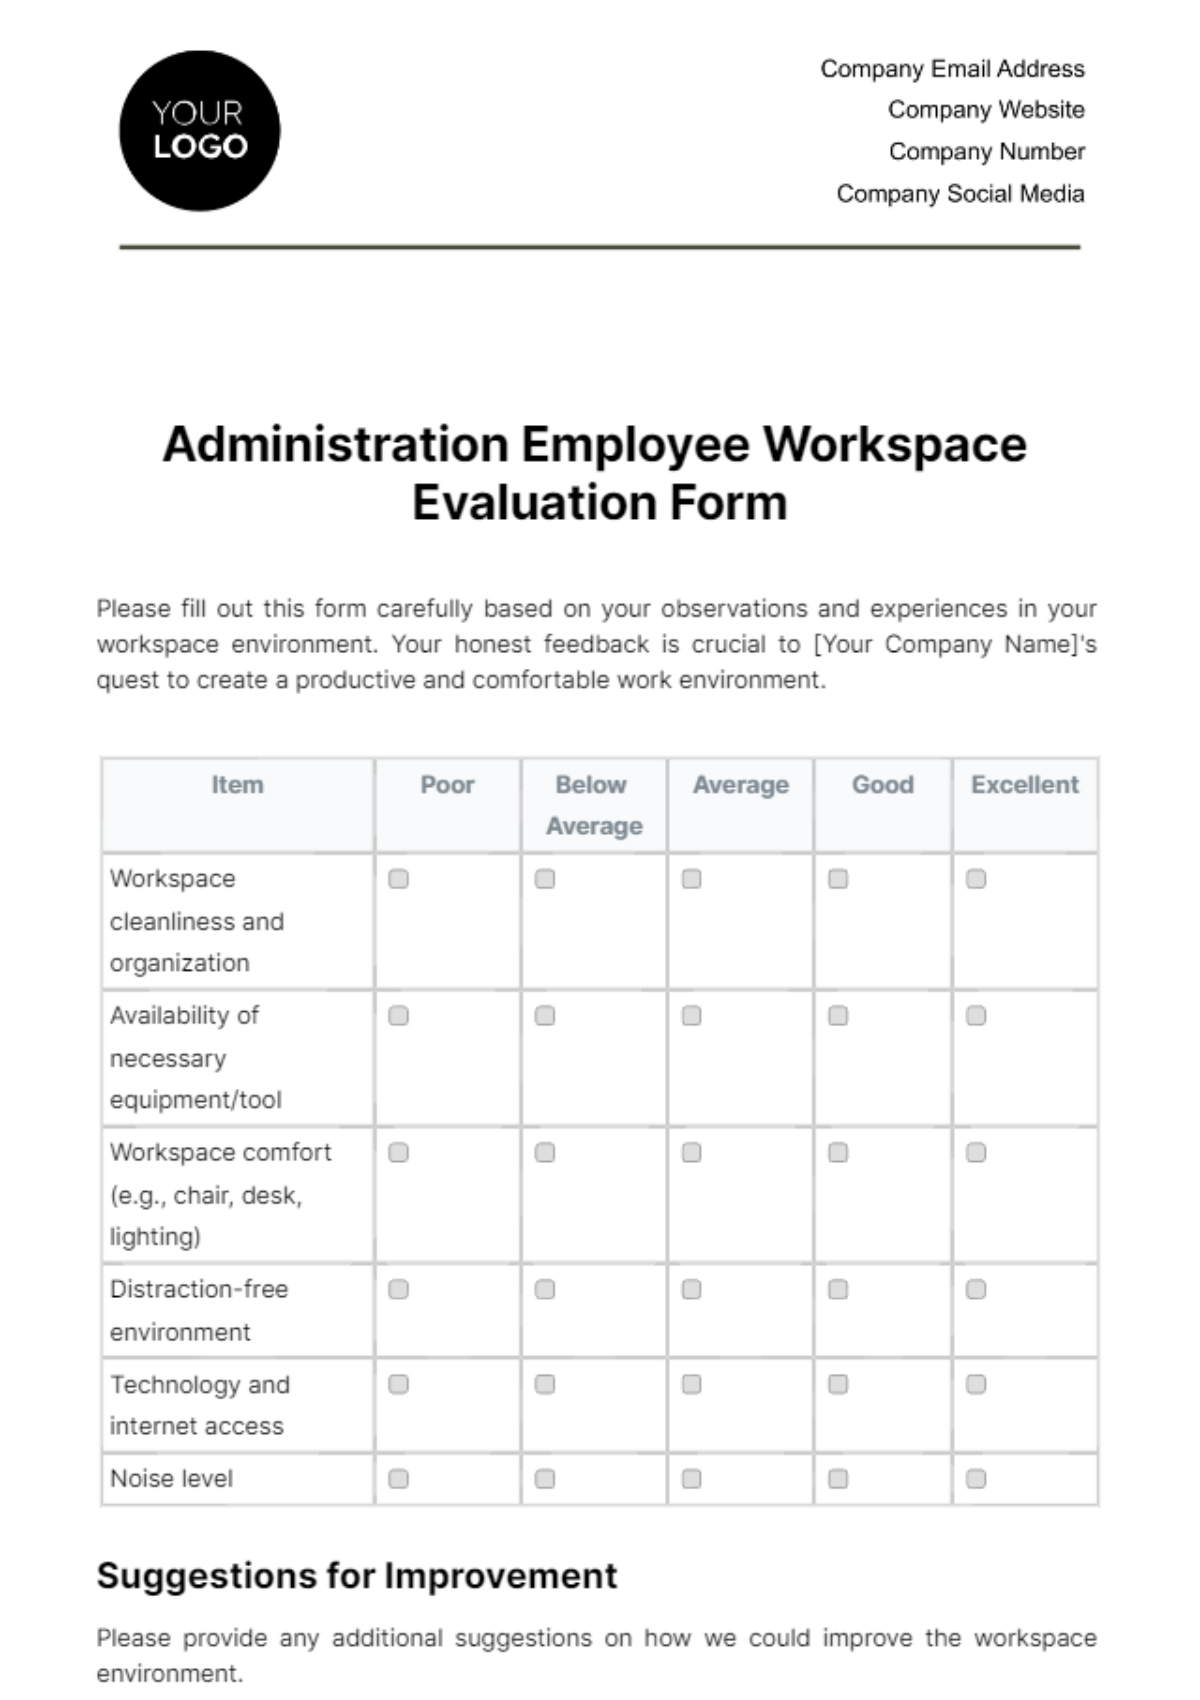 Administration Employee Workspace Evaluation Form Template